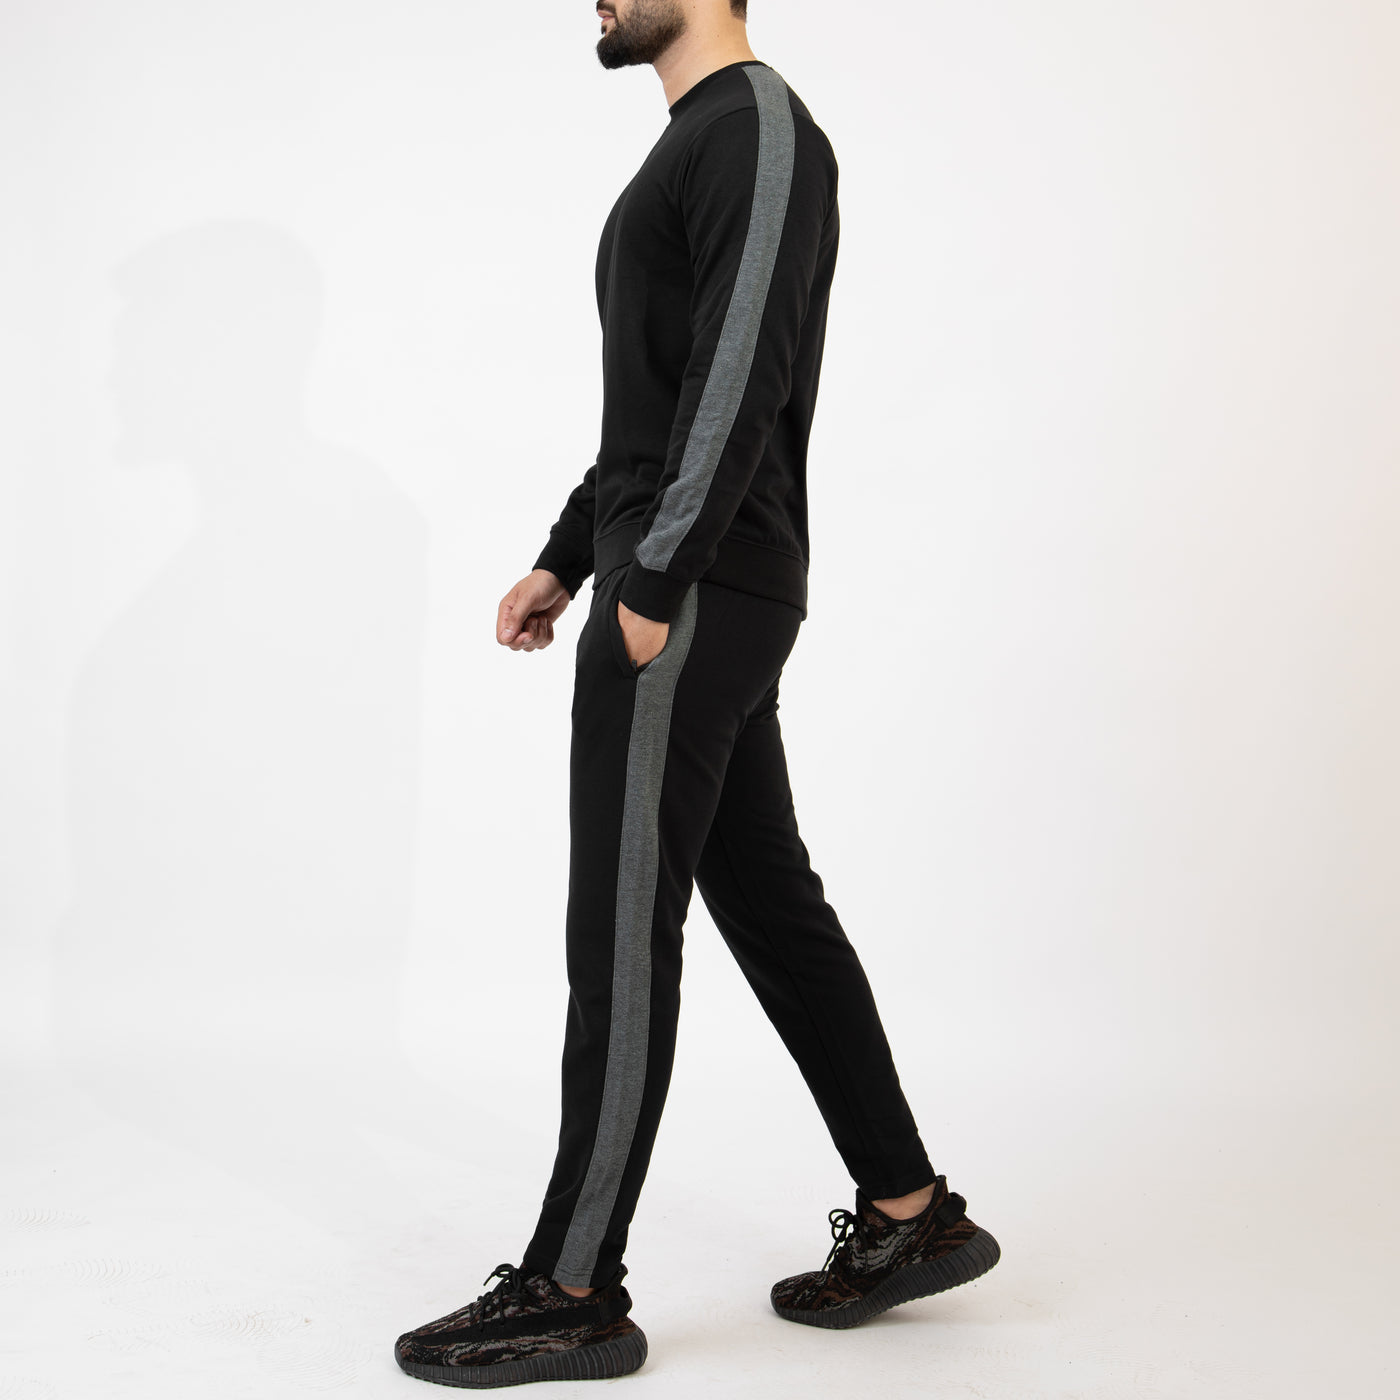 Black Tracksuit with Textured Gray Panels